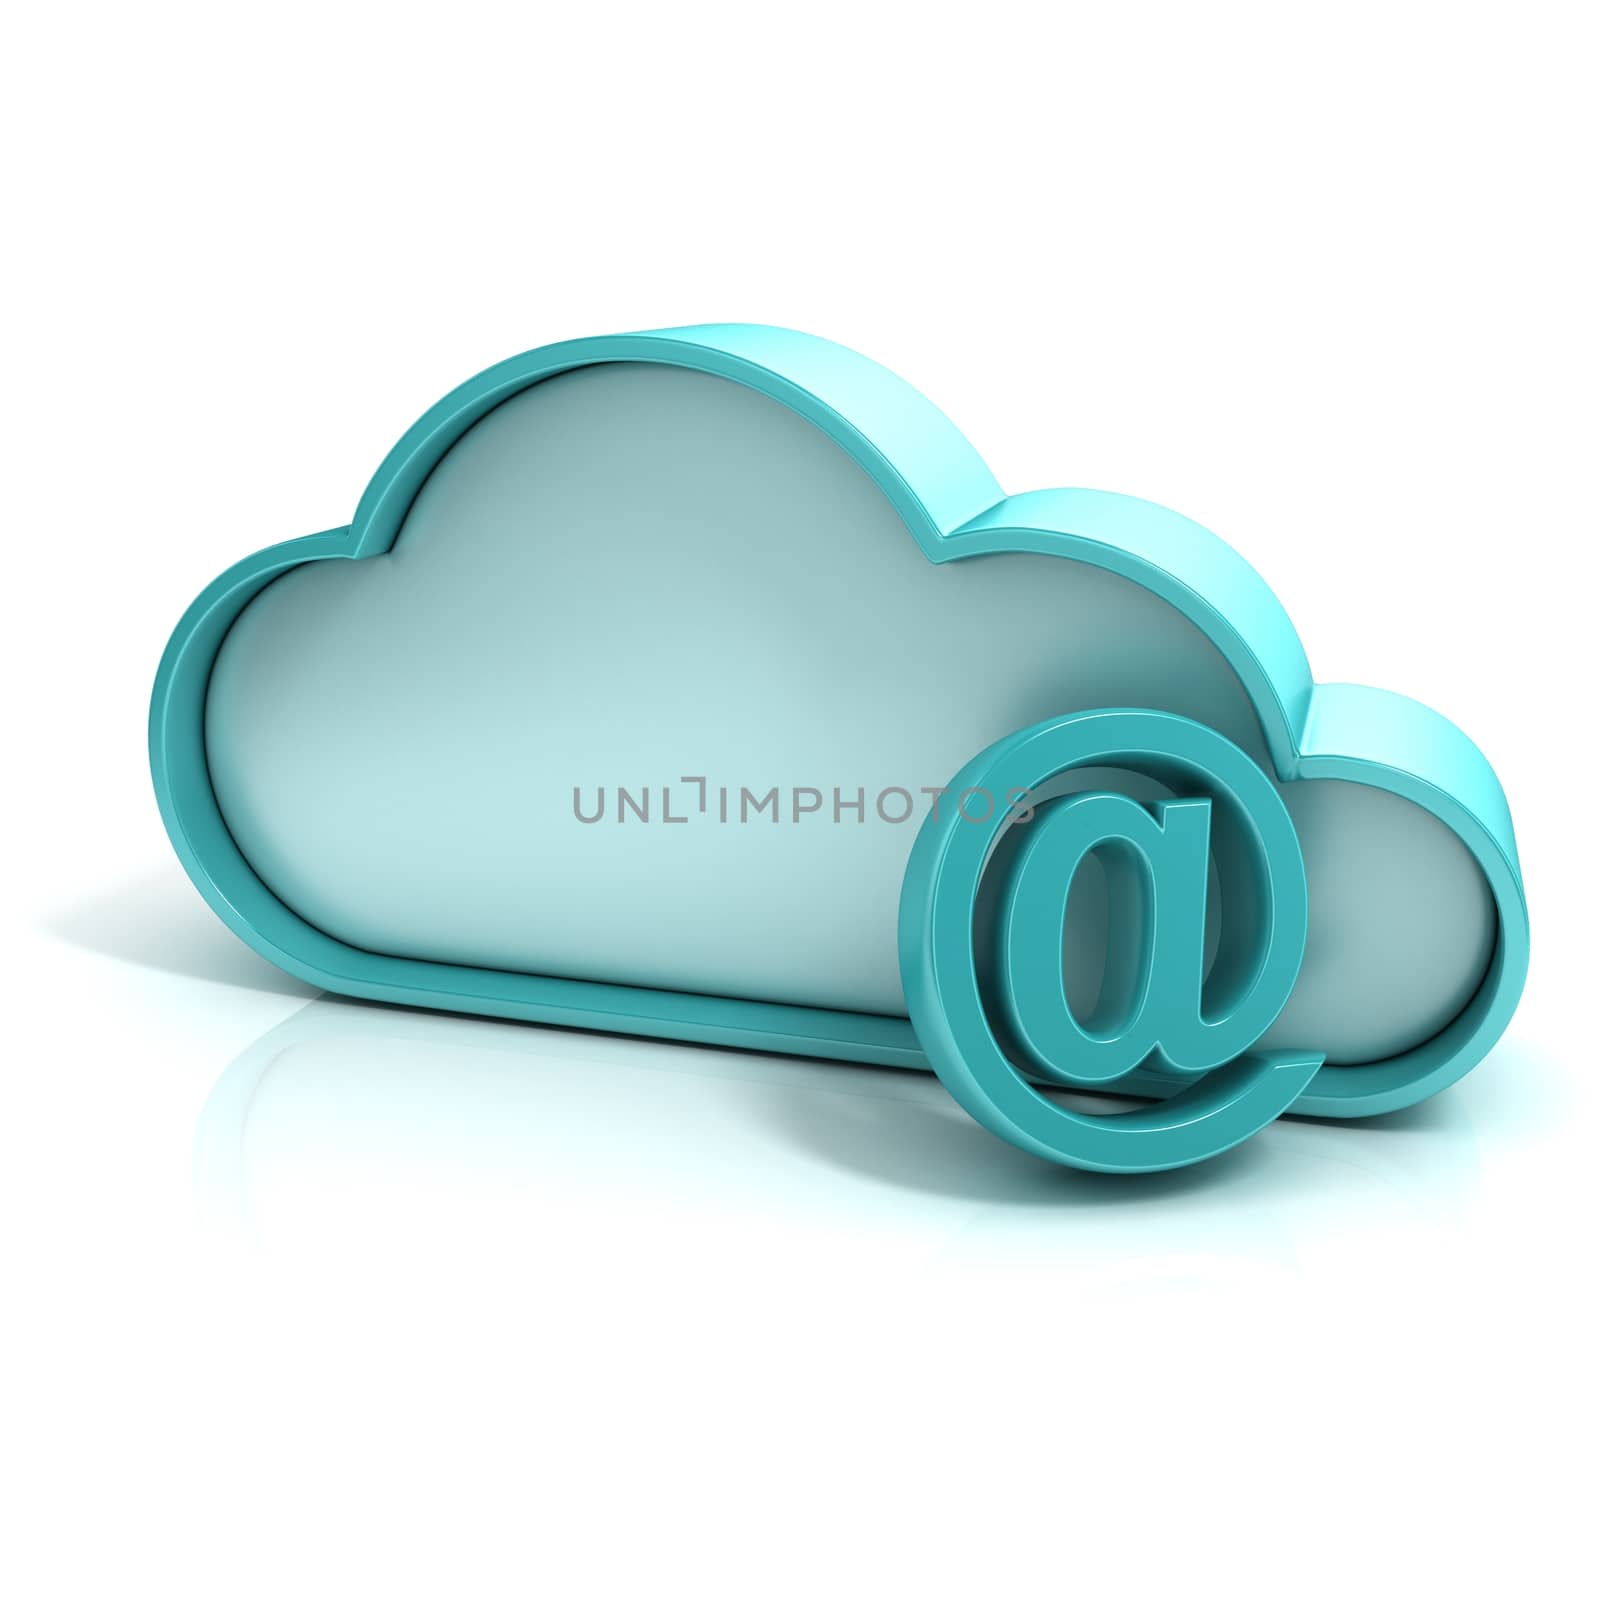 Cloud mail 3D computer icon isolated